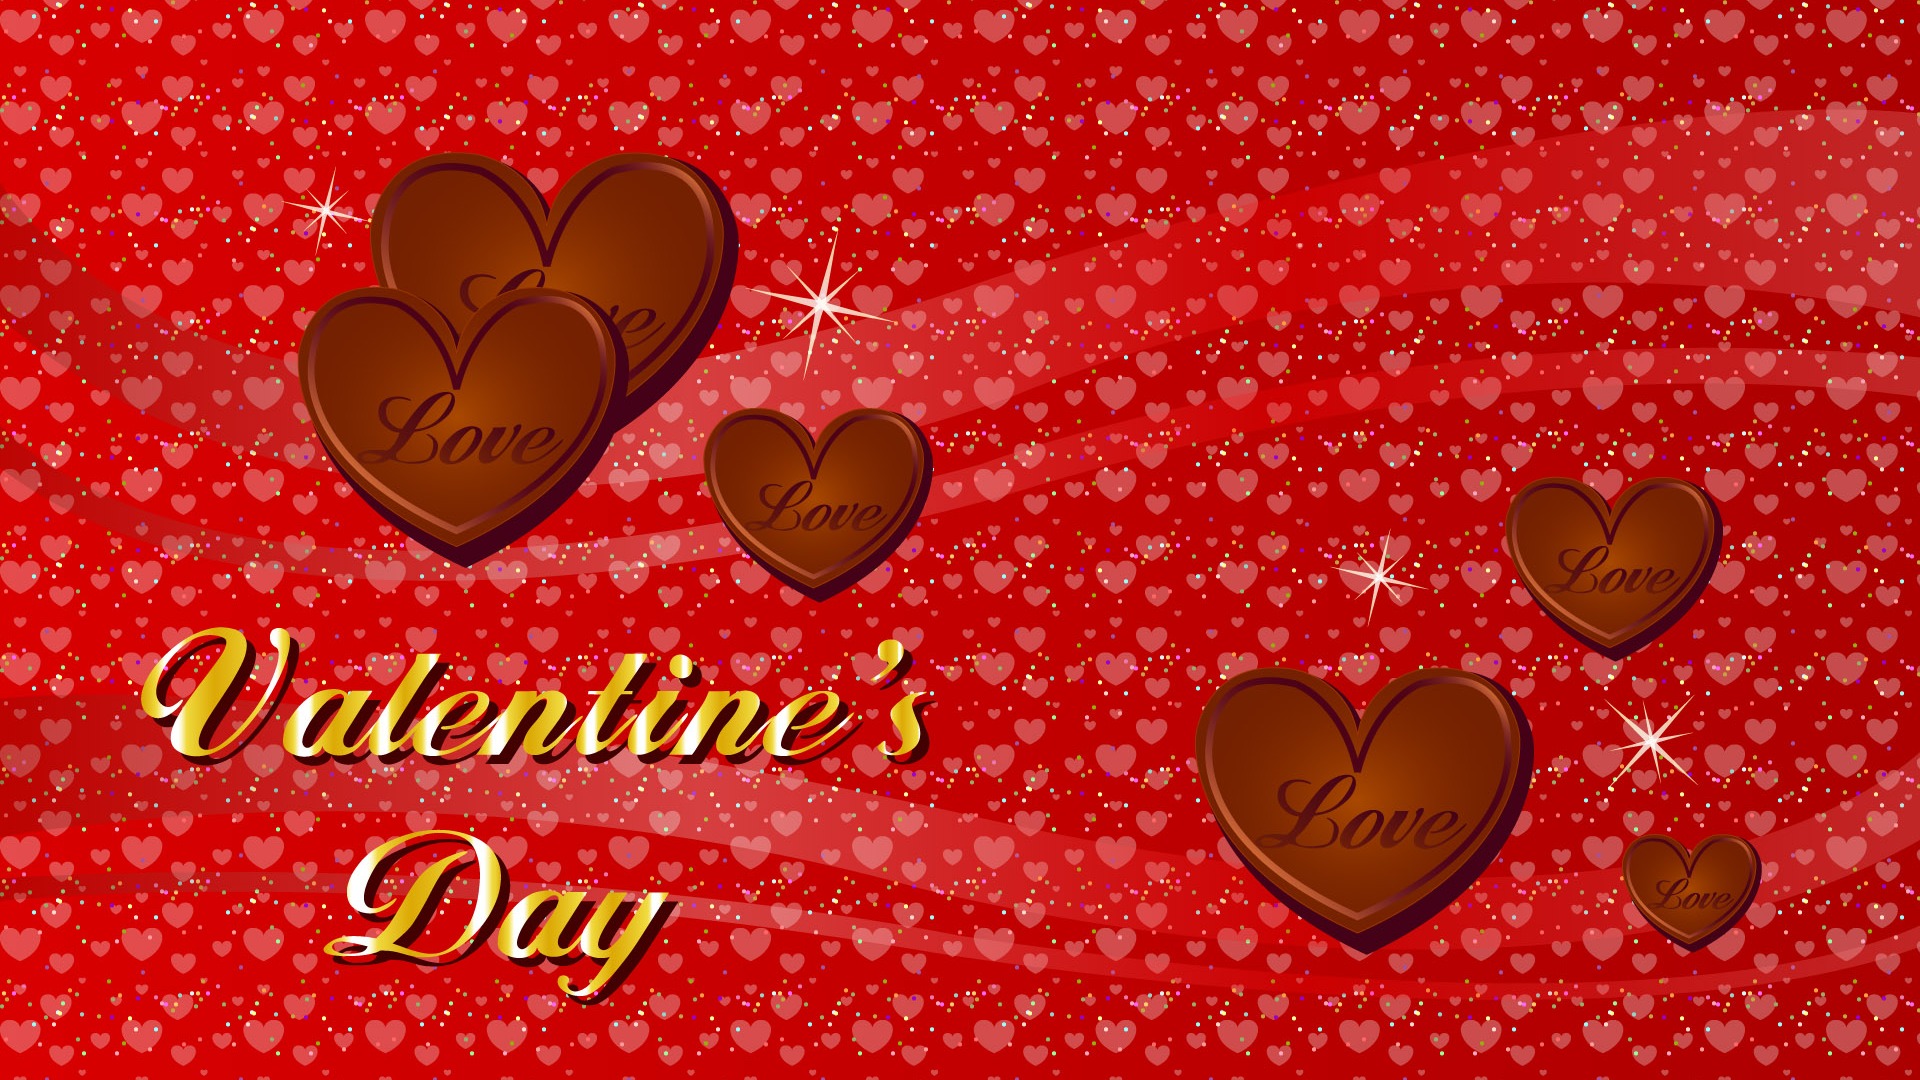 Valentine's Day Theme Wallpapers (1) #14 - 1920x1080